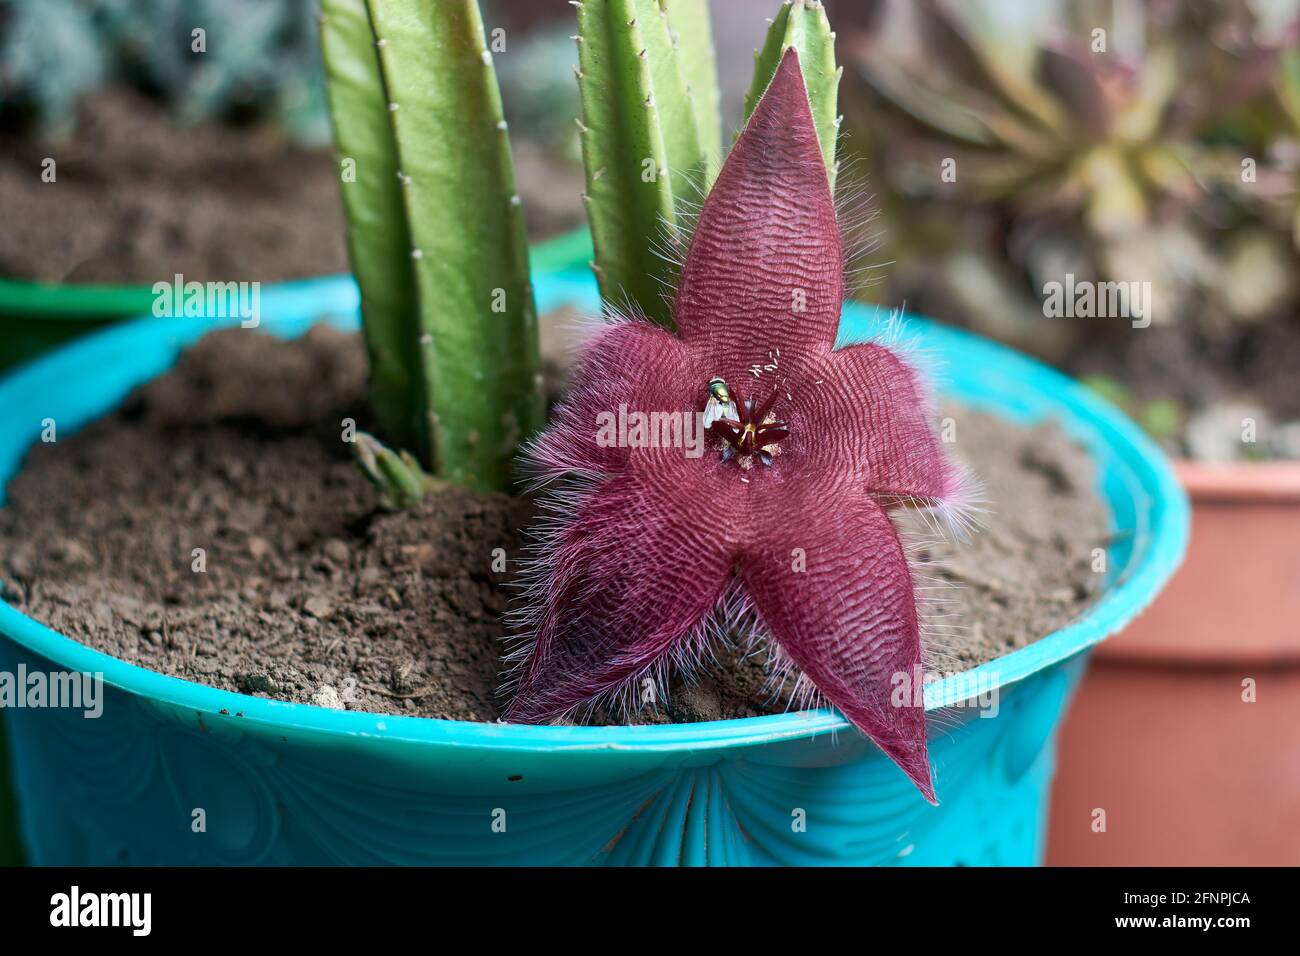 View of stapelia purple starfish flower and succulent plant on flowerpot with fly and fly eggs on it. Horizontal close up. Stock Photo